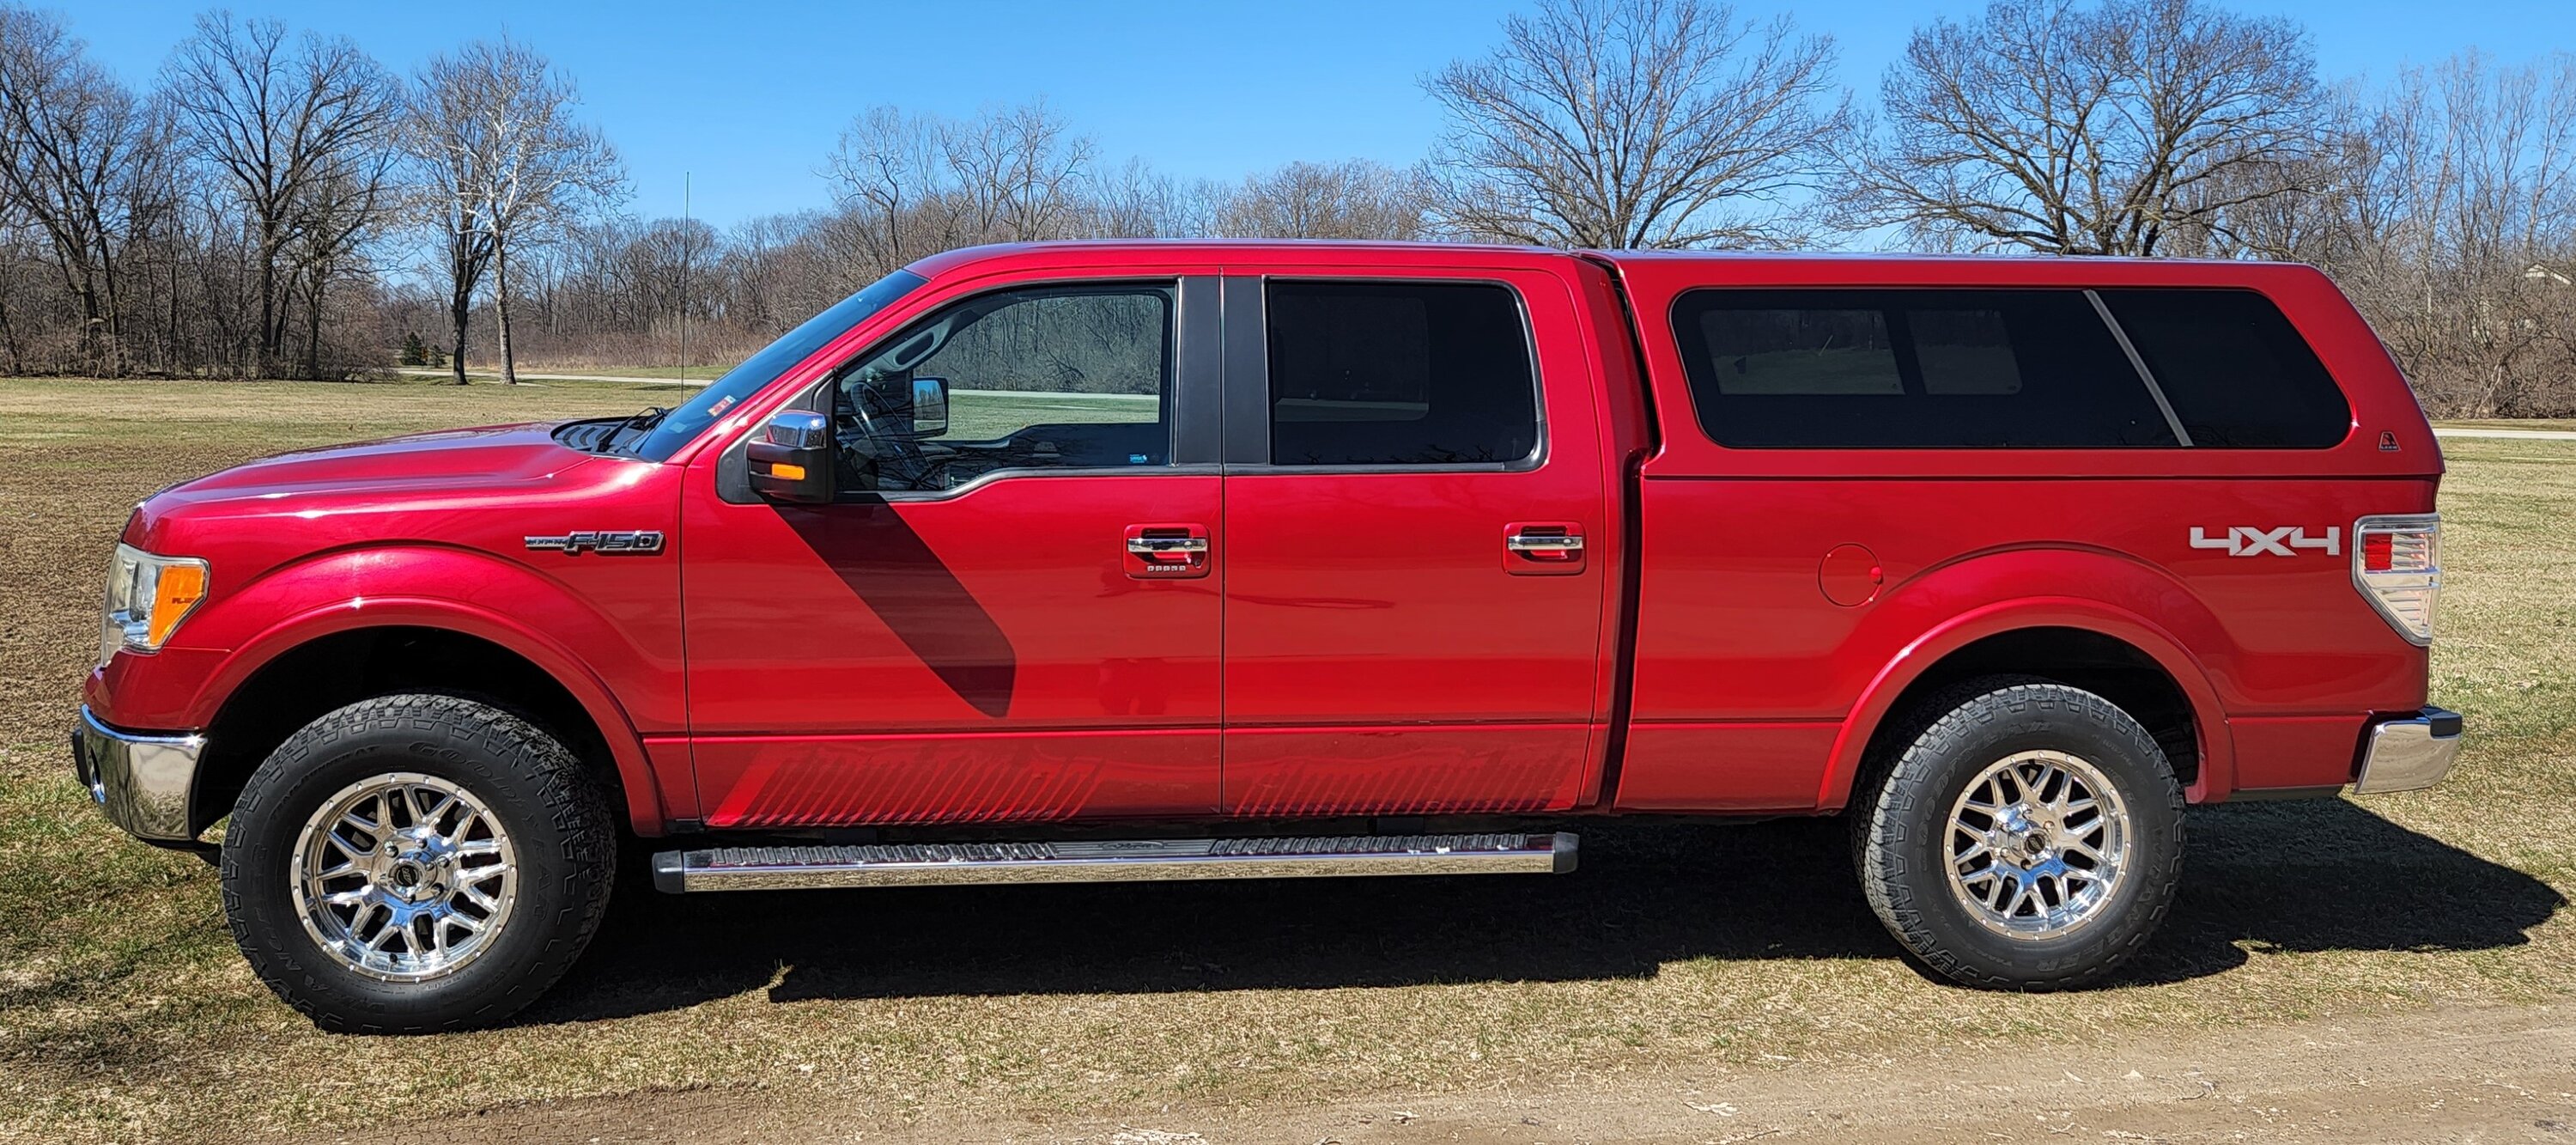 Ford F-150 Post a Pic of Your F150 and We’ll Rate It 1